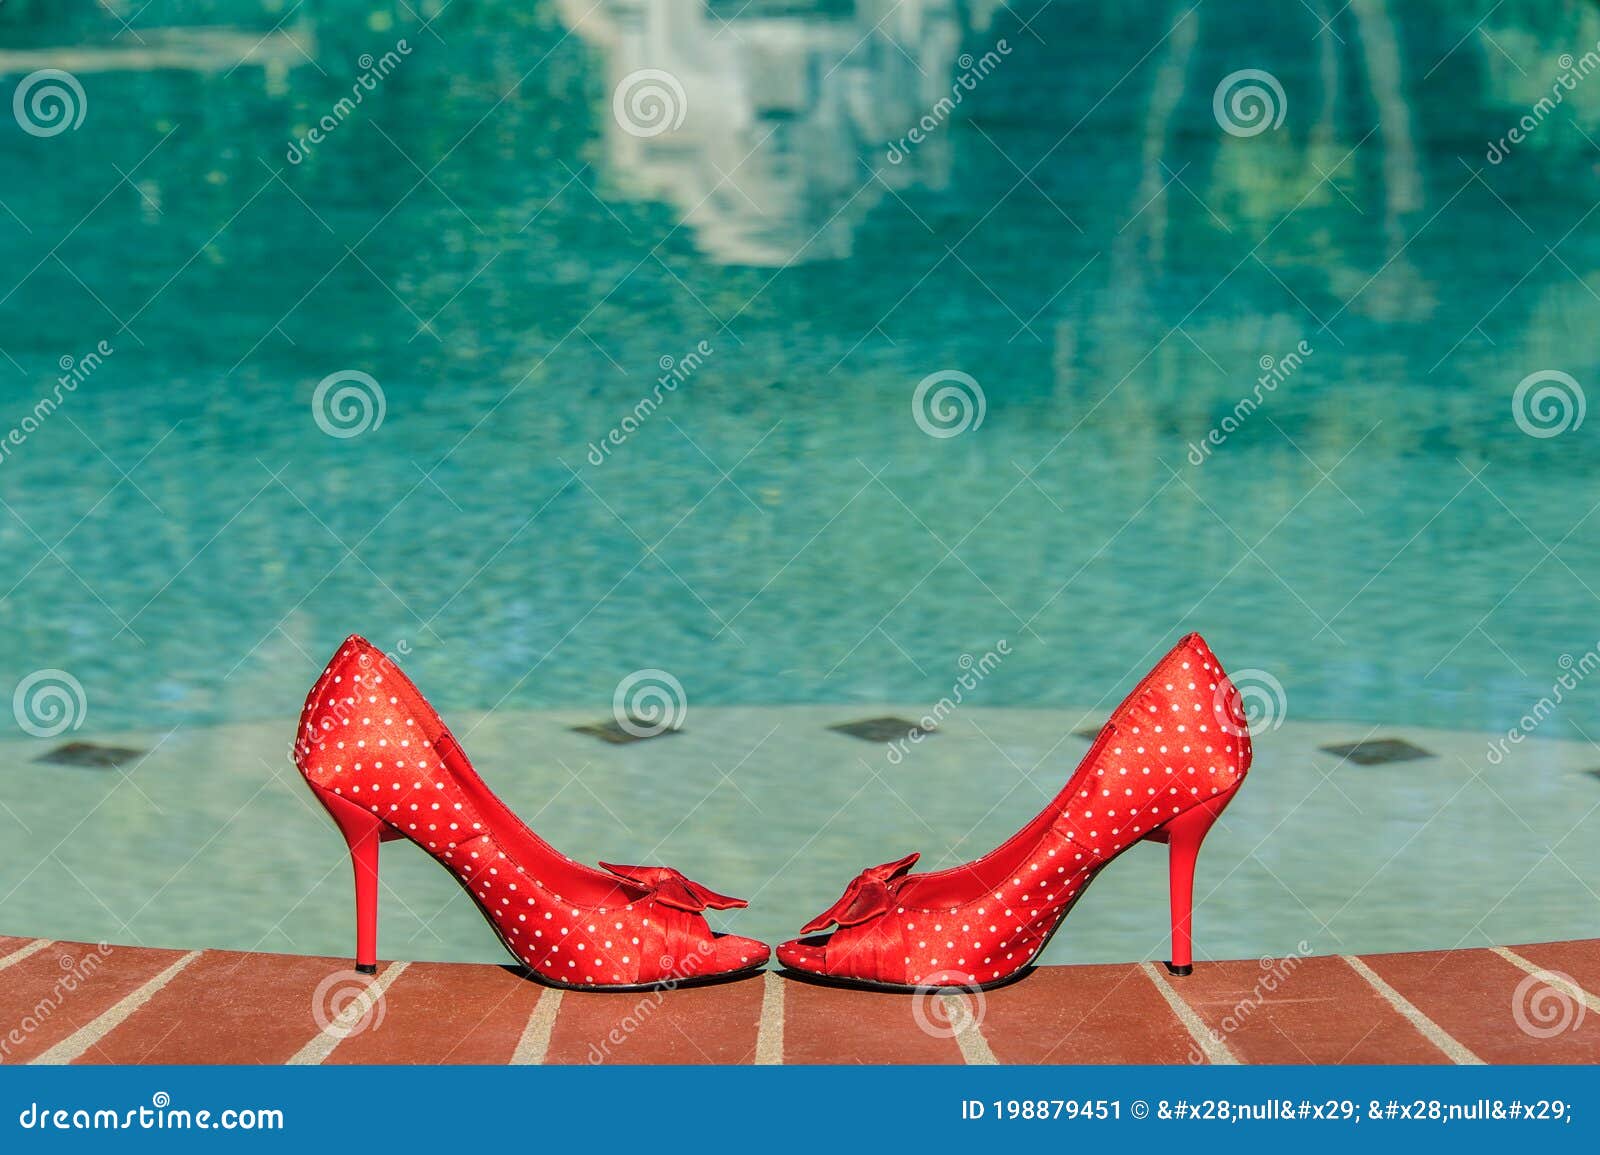 Red High Heels - Toe-to-Toe Poolside Horiz Stock Image - Image of ...